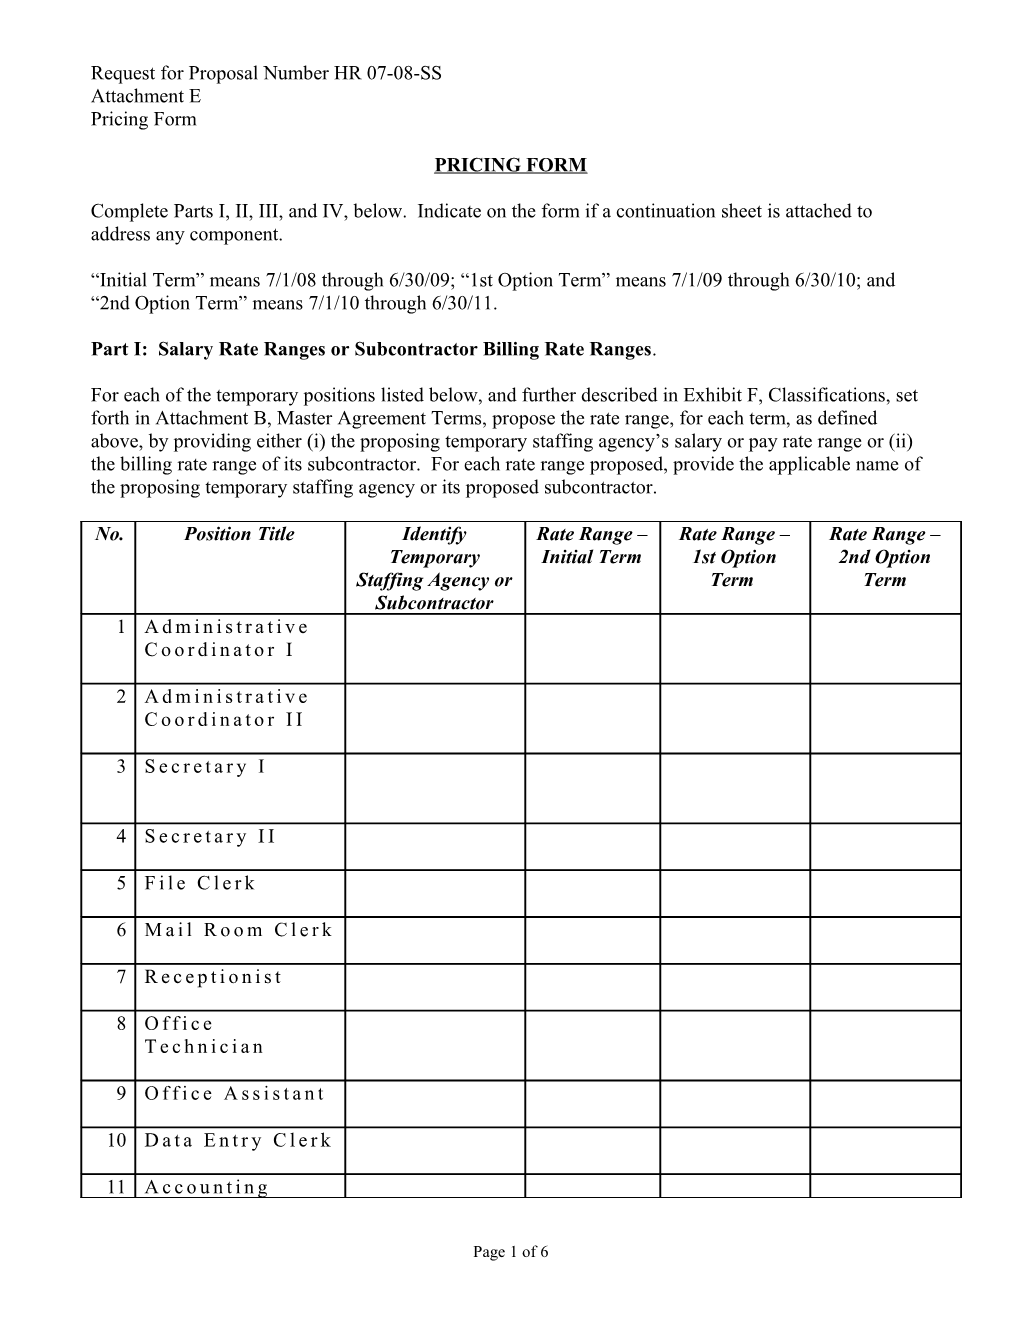 Request for Proposal Number HR 07-08-SS